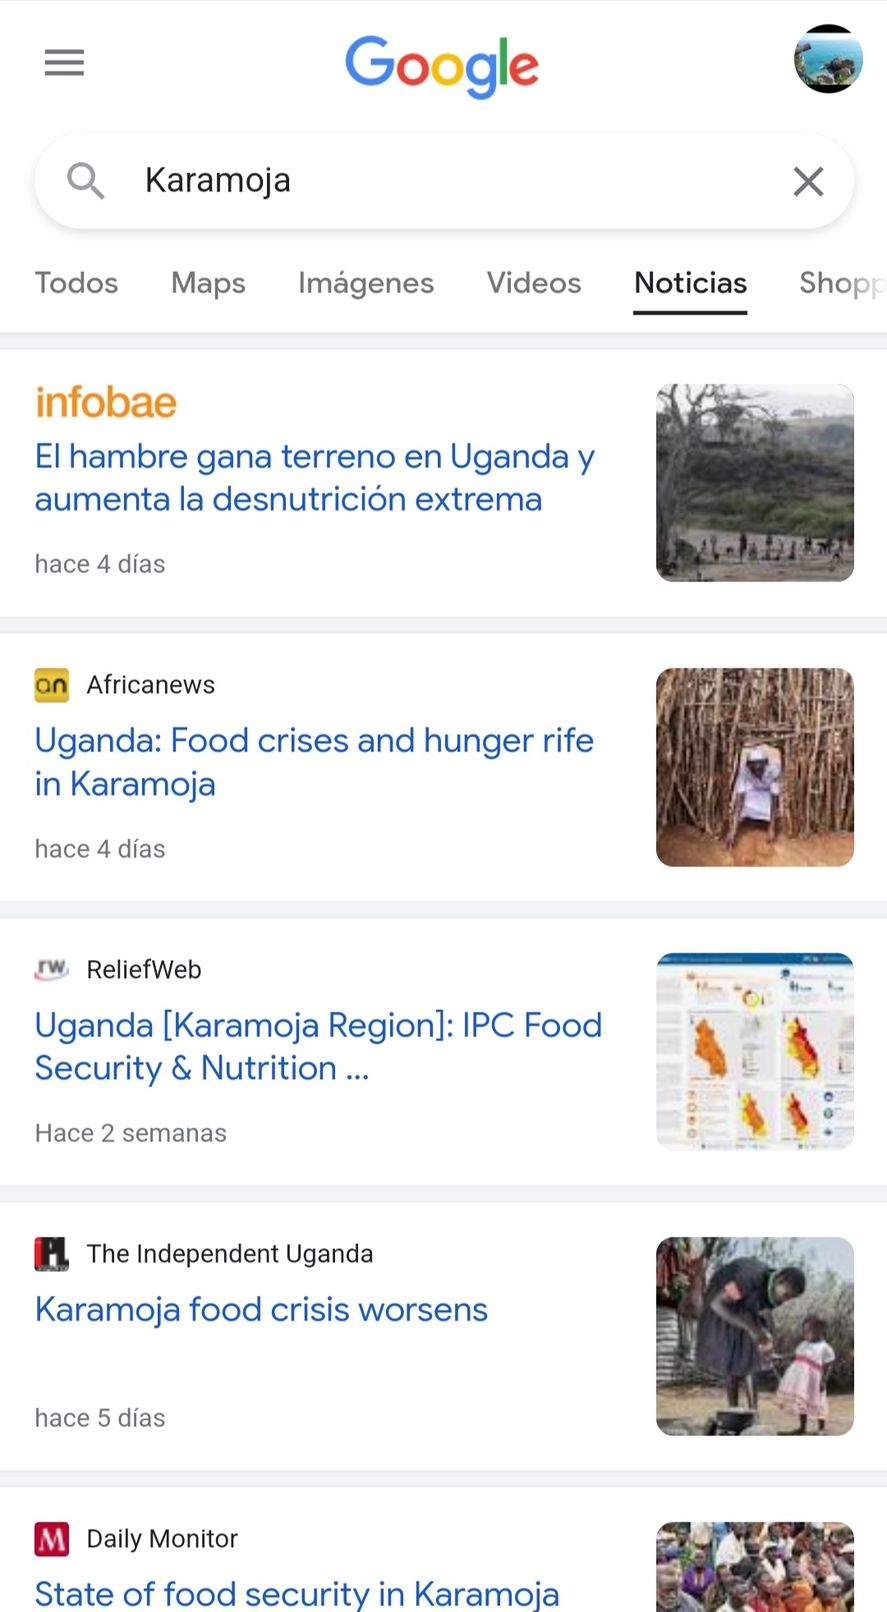 Only in recent days did the Western media highlight the hunger and security crisis in the Karamoja region of Africa in Uganda.  They don't say a word about gold 